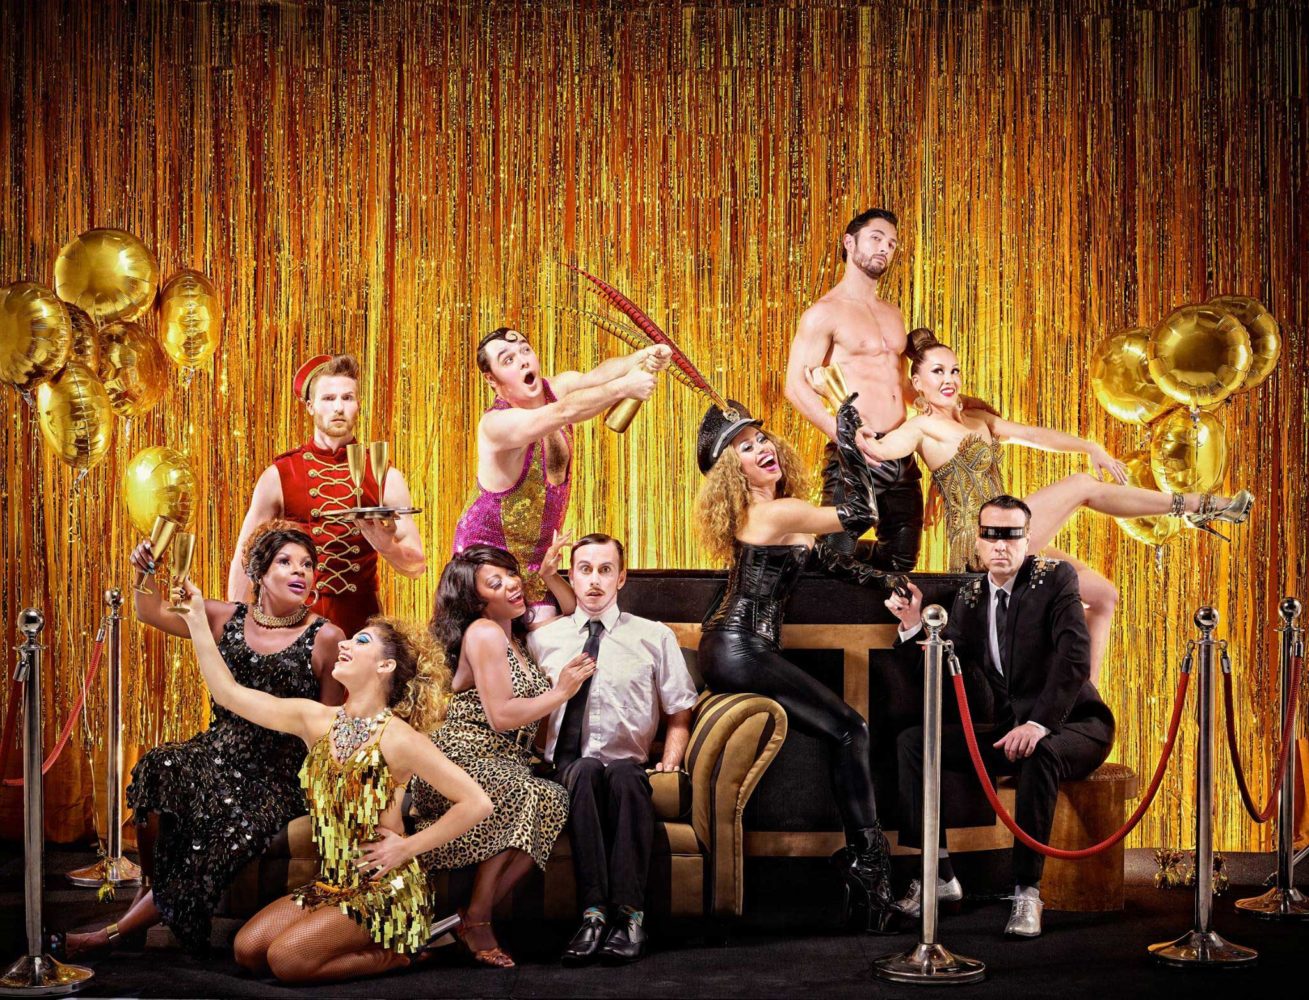 A group of vaudeville performers posed on stage with a gold-curtained backdrop